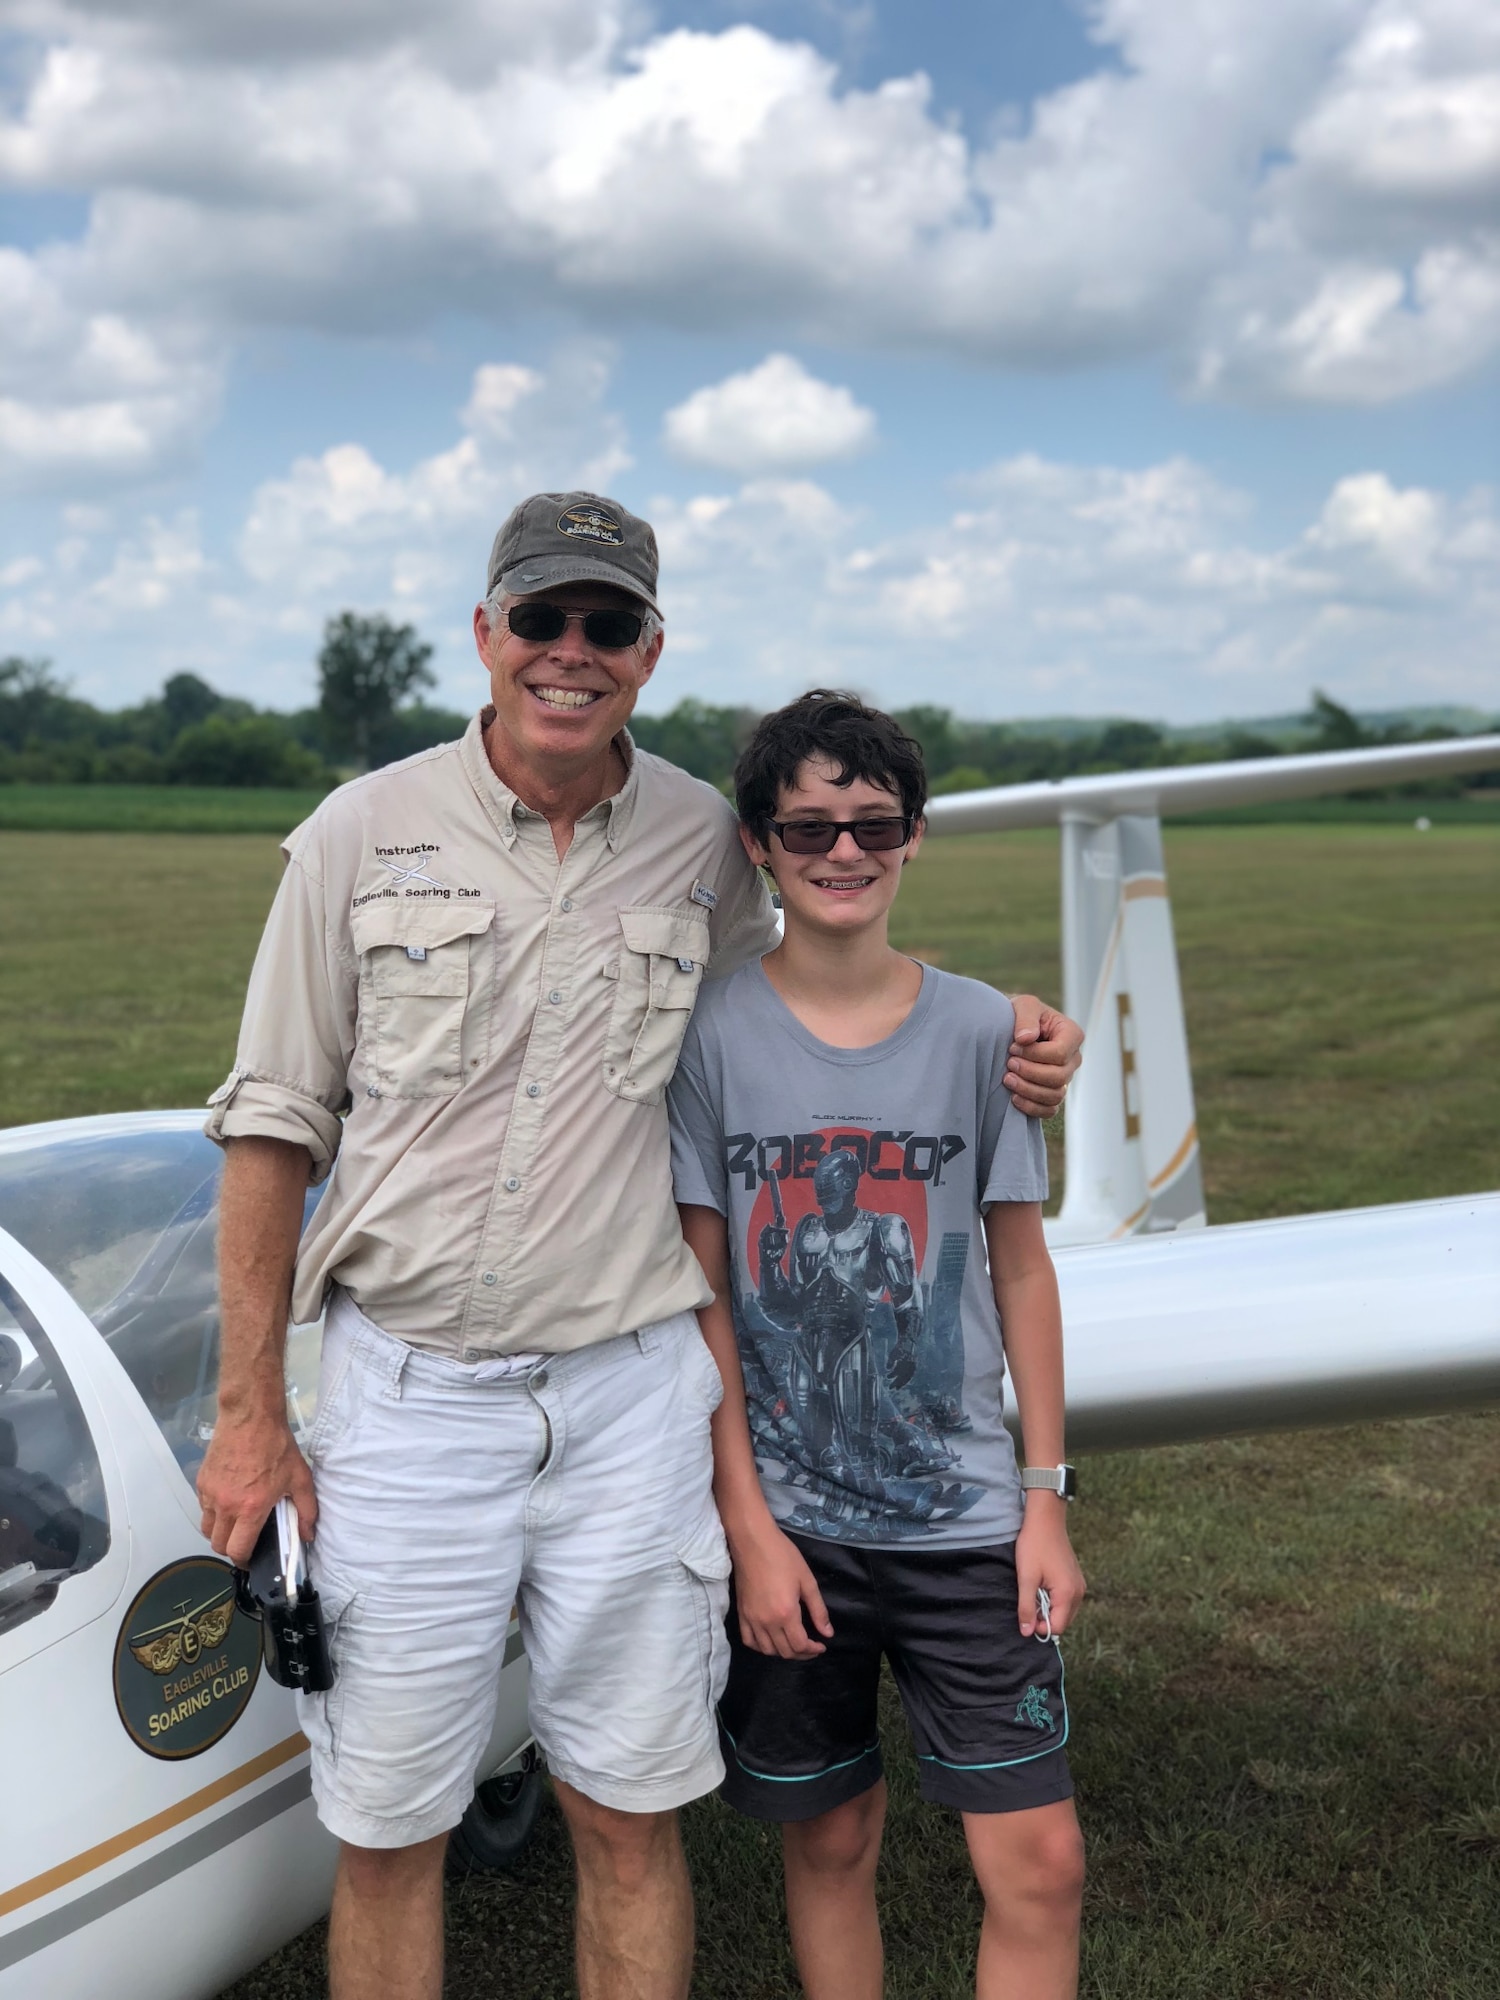 Middle school student Christian Davis, right, had the chance to fly recently with the Eagleville Soar Club after completing the Fly to Learn course, which is a 10-lesson curriculum using virtual airplanes to simulate flight. Pictured with Davis is his instructor pilot Jere Matty. The Fly to Learn Aviation Program is sponsored by Arnold Air Force Science, Technology, Engineering and Mathematics Program. (Courtesy photo)